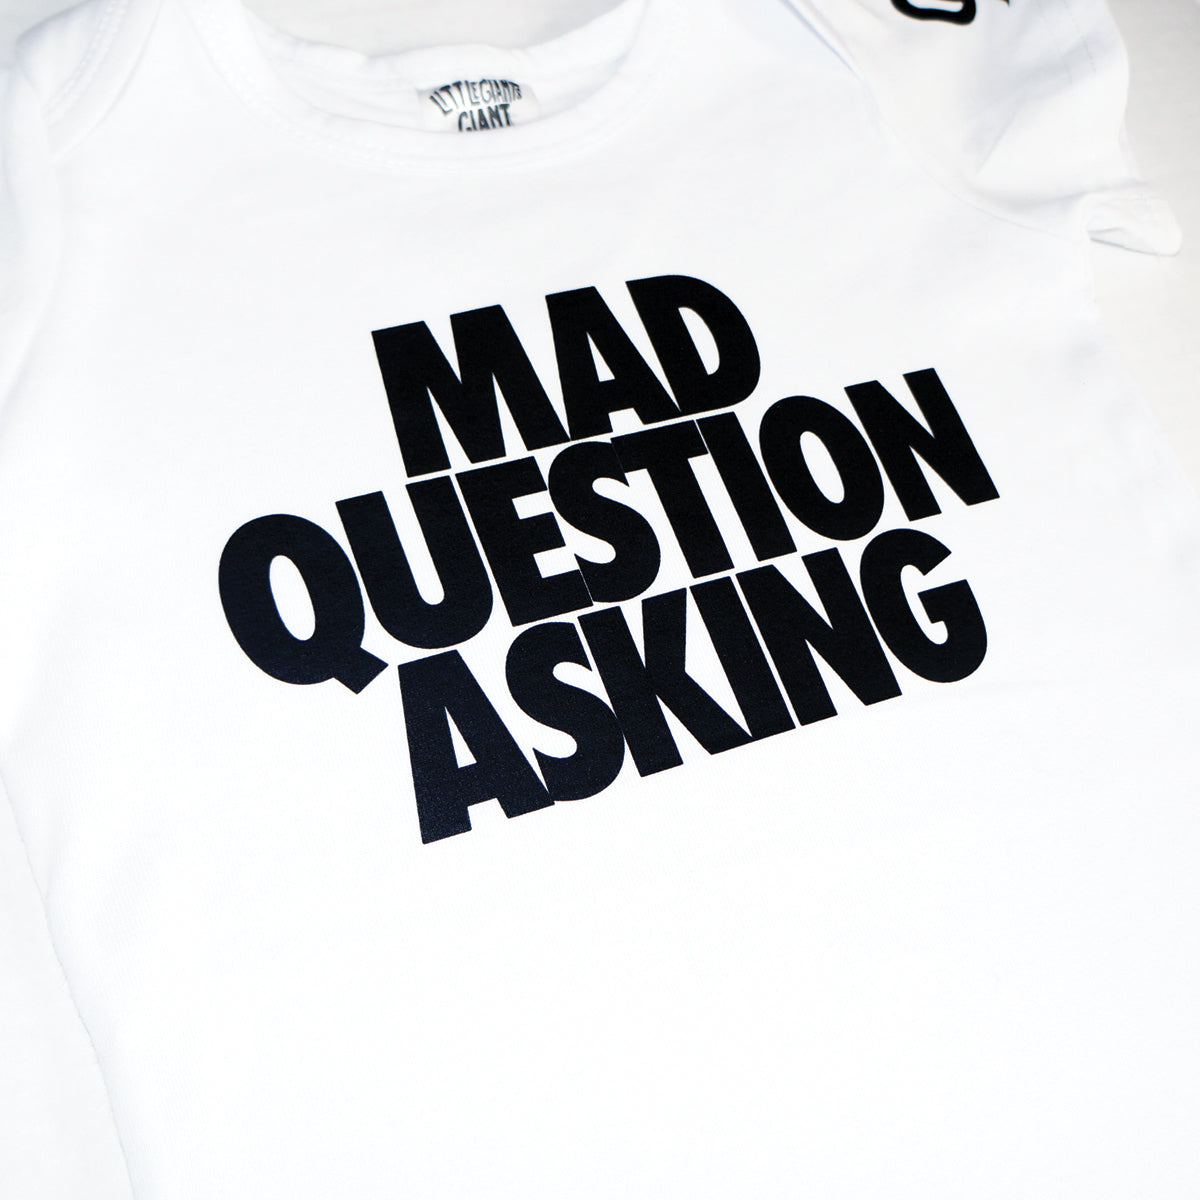 Mad Question Asking Onesie (White)